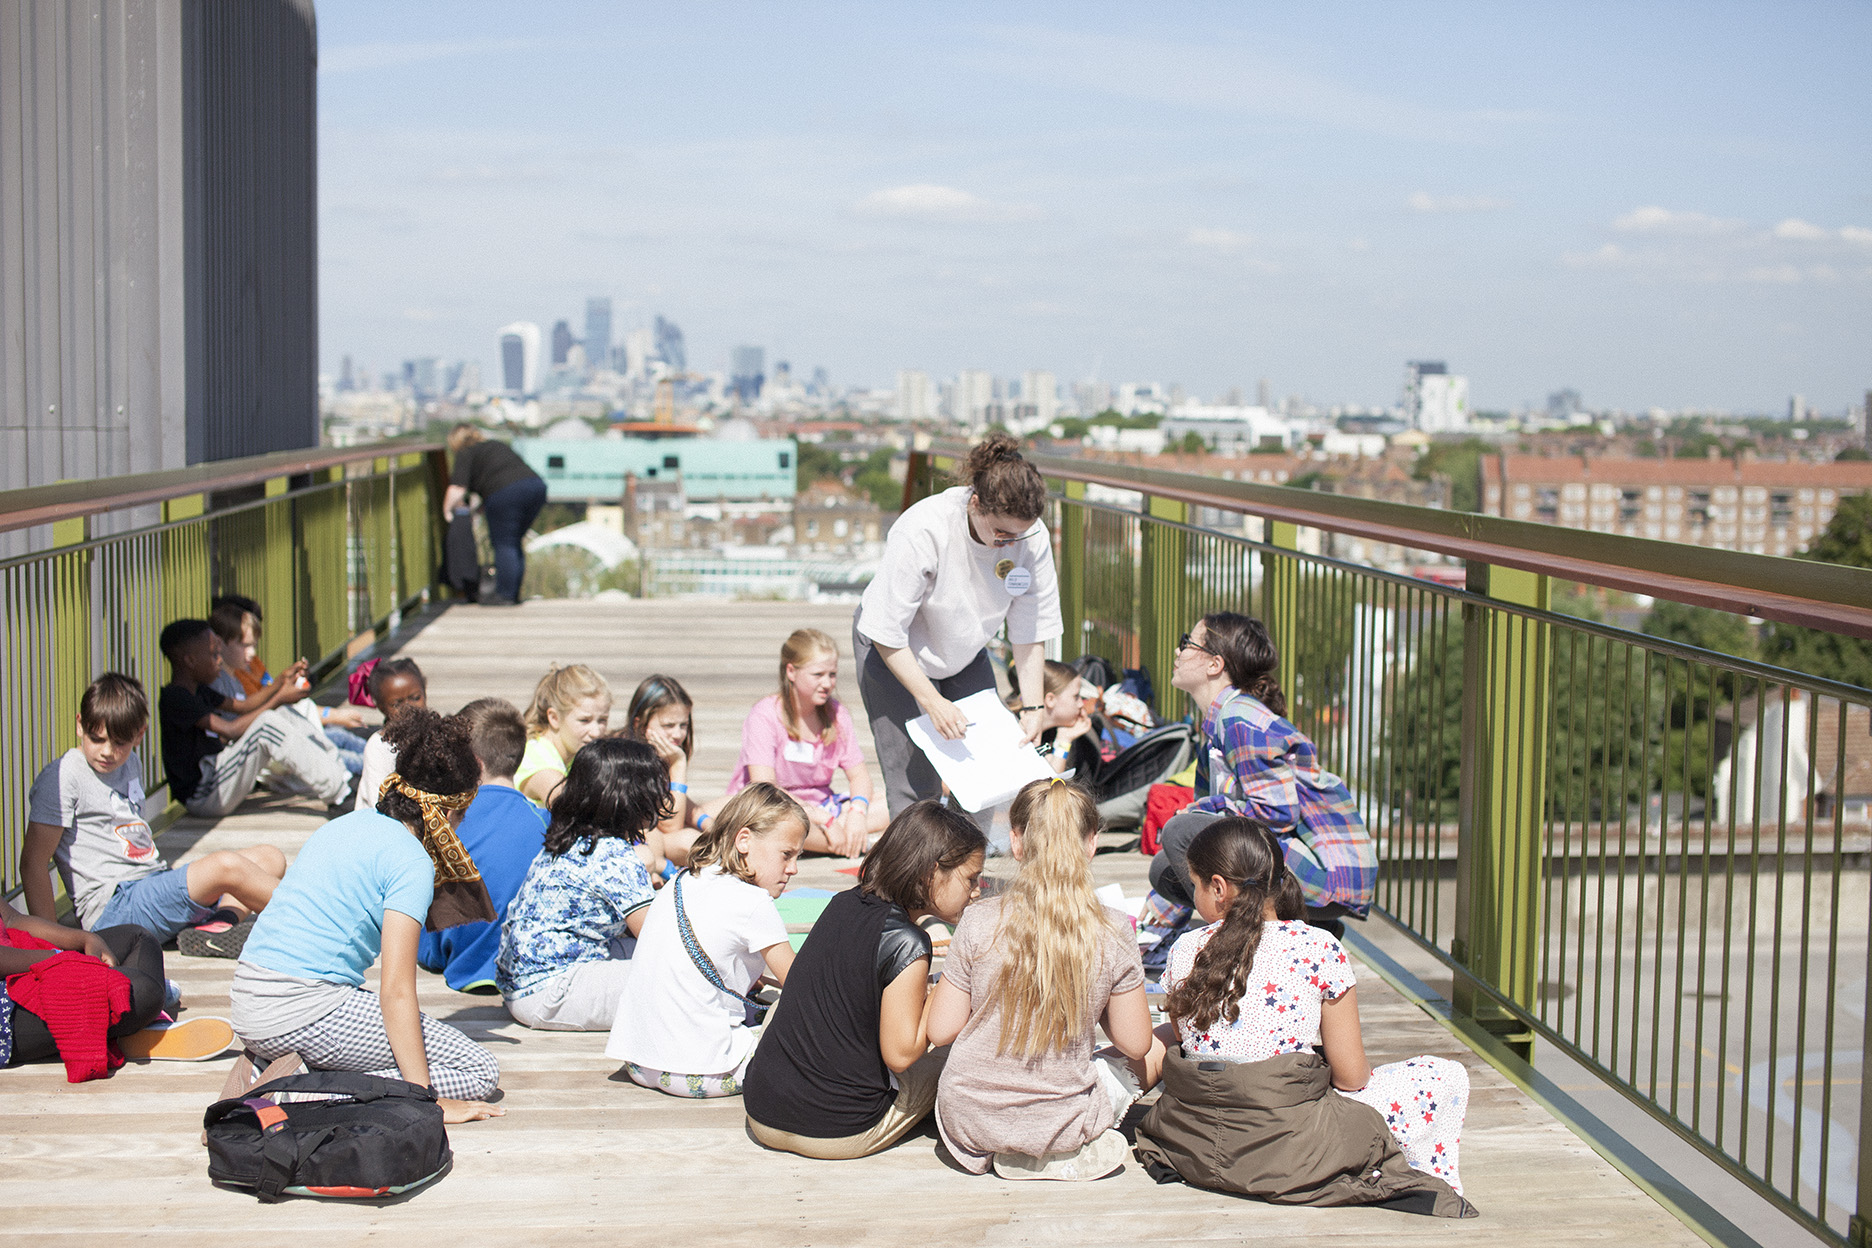 ID: a group of 15 young school children are sat on a raised platform on a concrete rooftop with the London skyline and blue skies in the background. They are sketching in notebooks and taking instructions from an adult workshop leader.